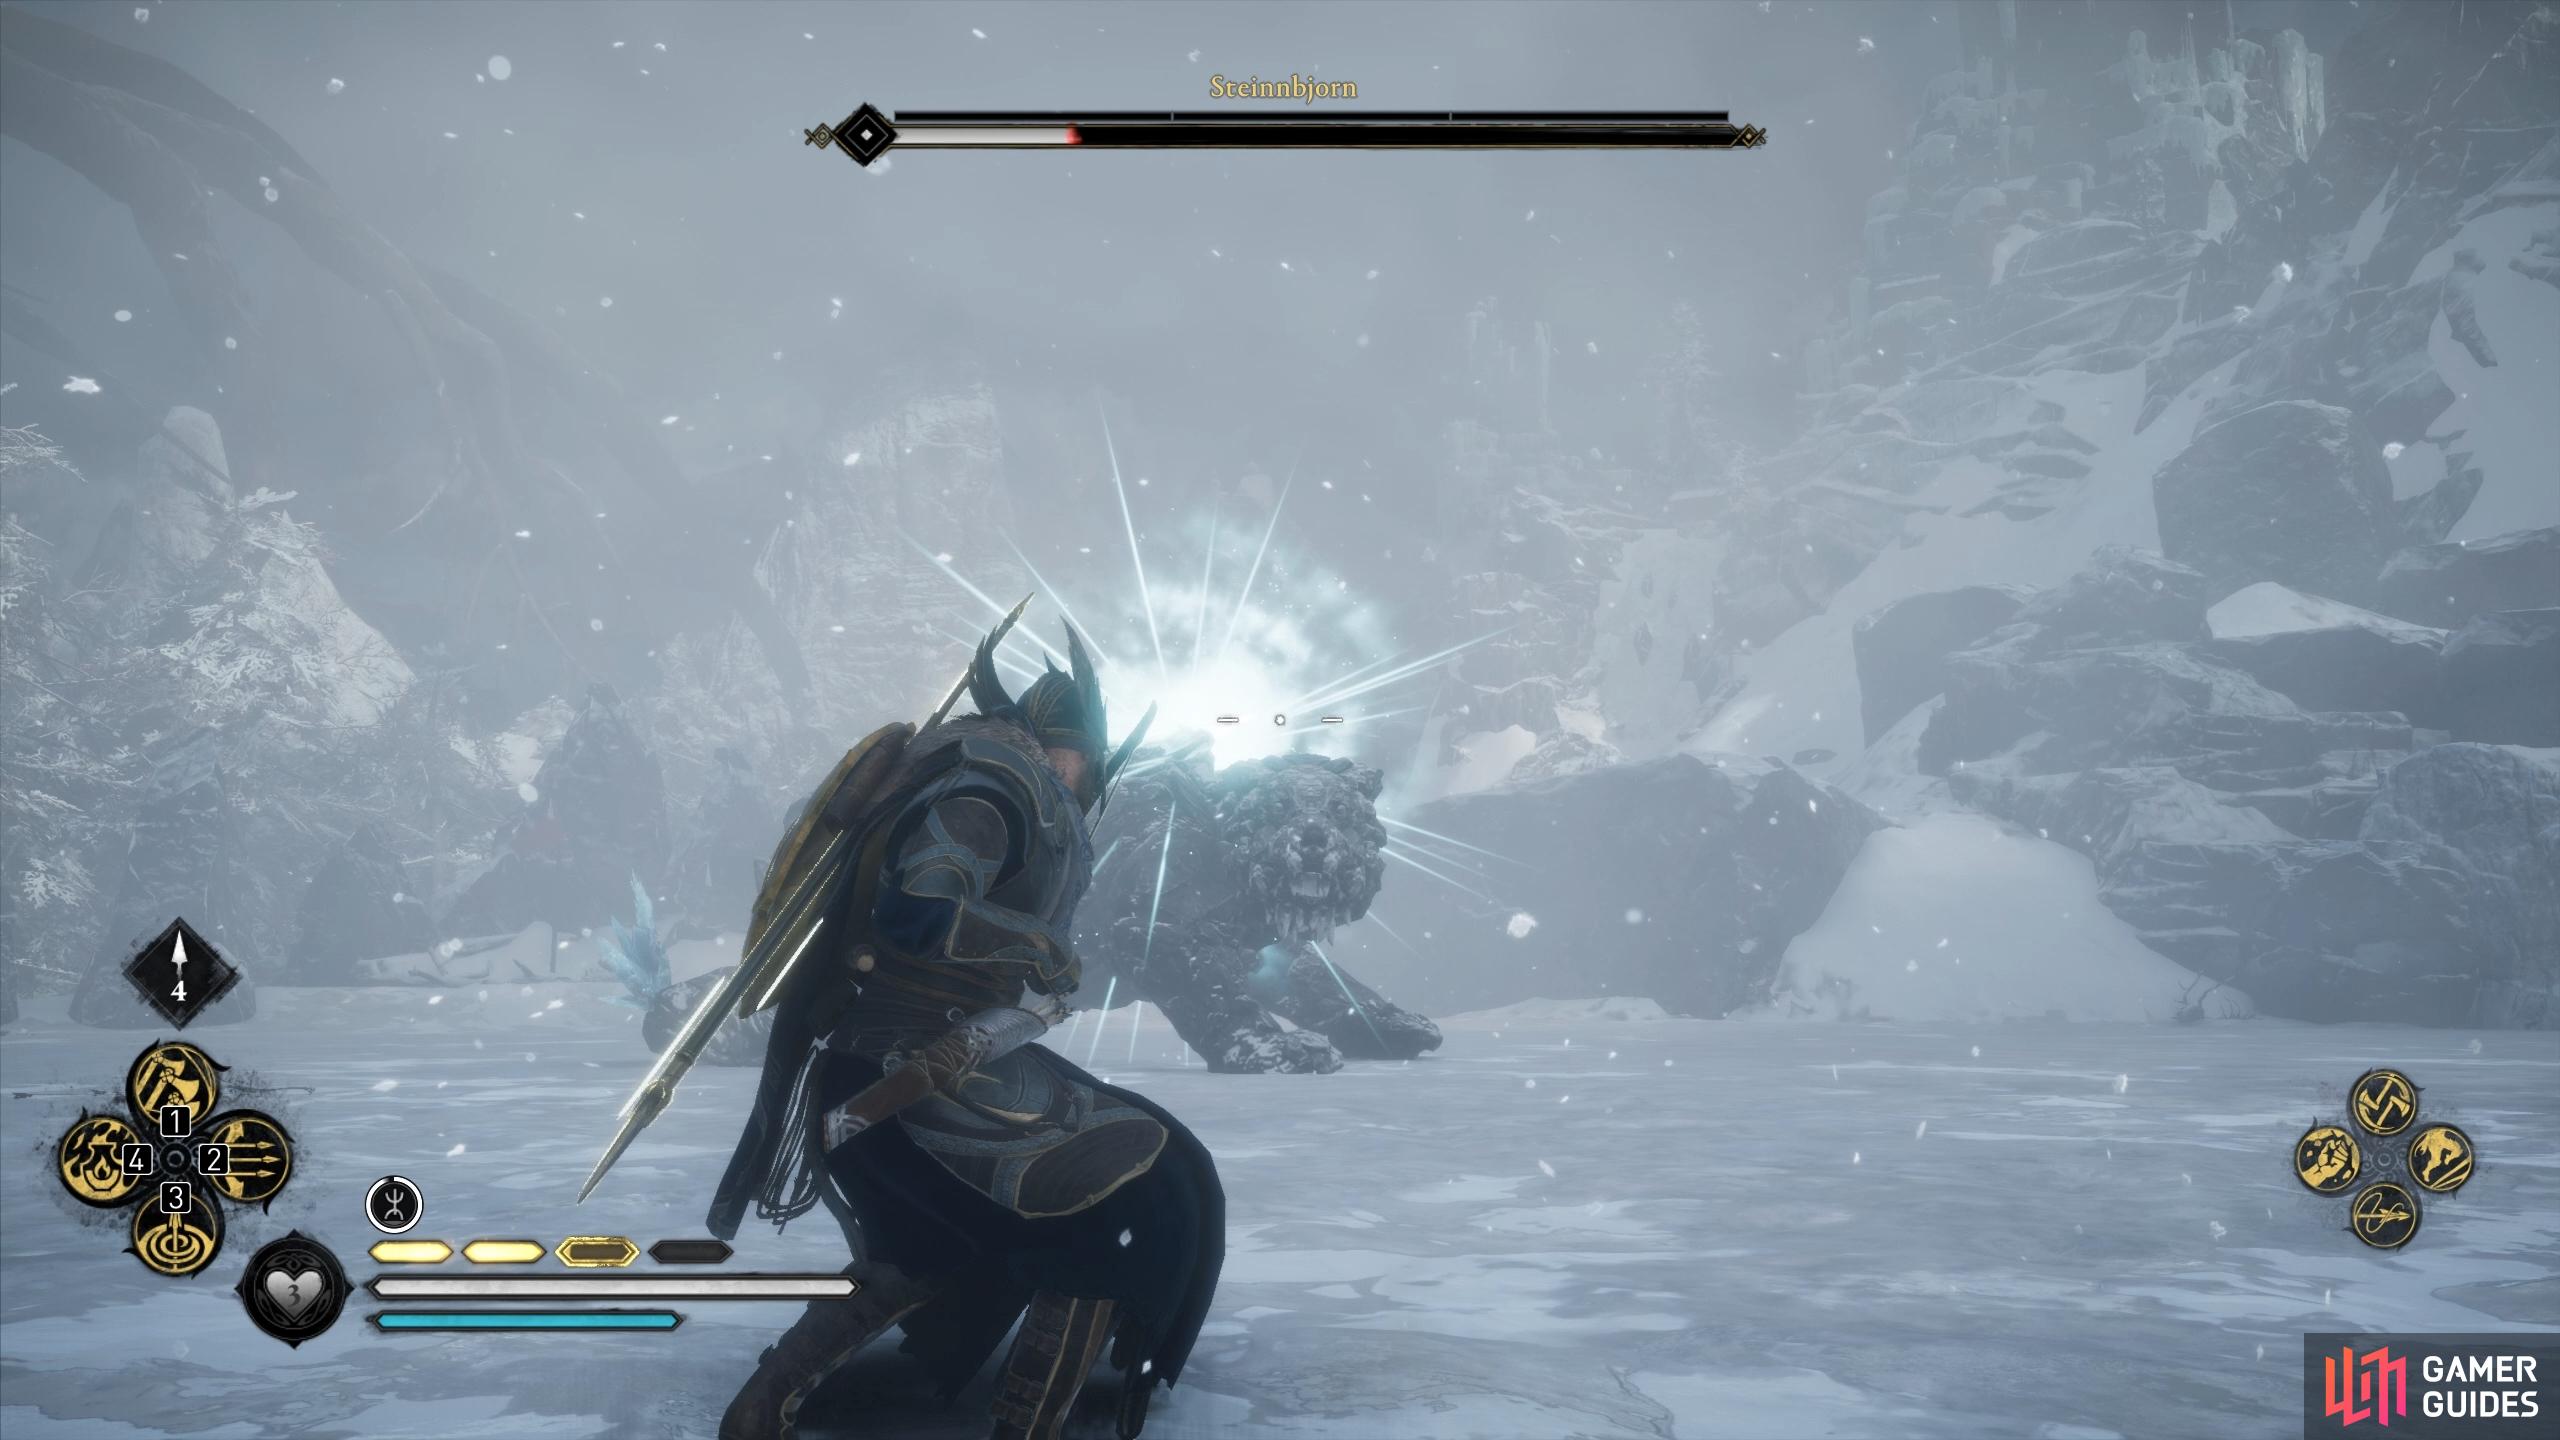 Shoot the ice from Steinnbjorn's body to stun the bear for a brief moment.